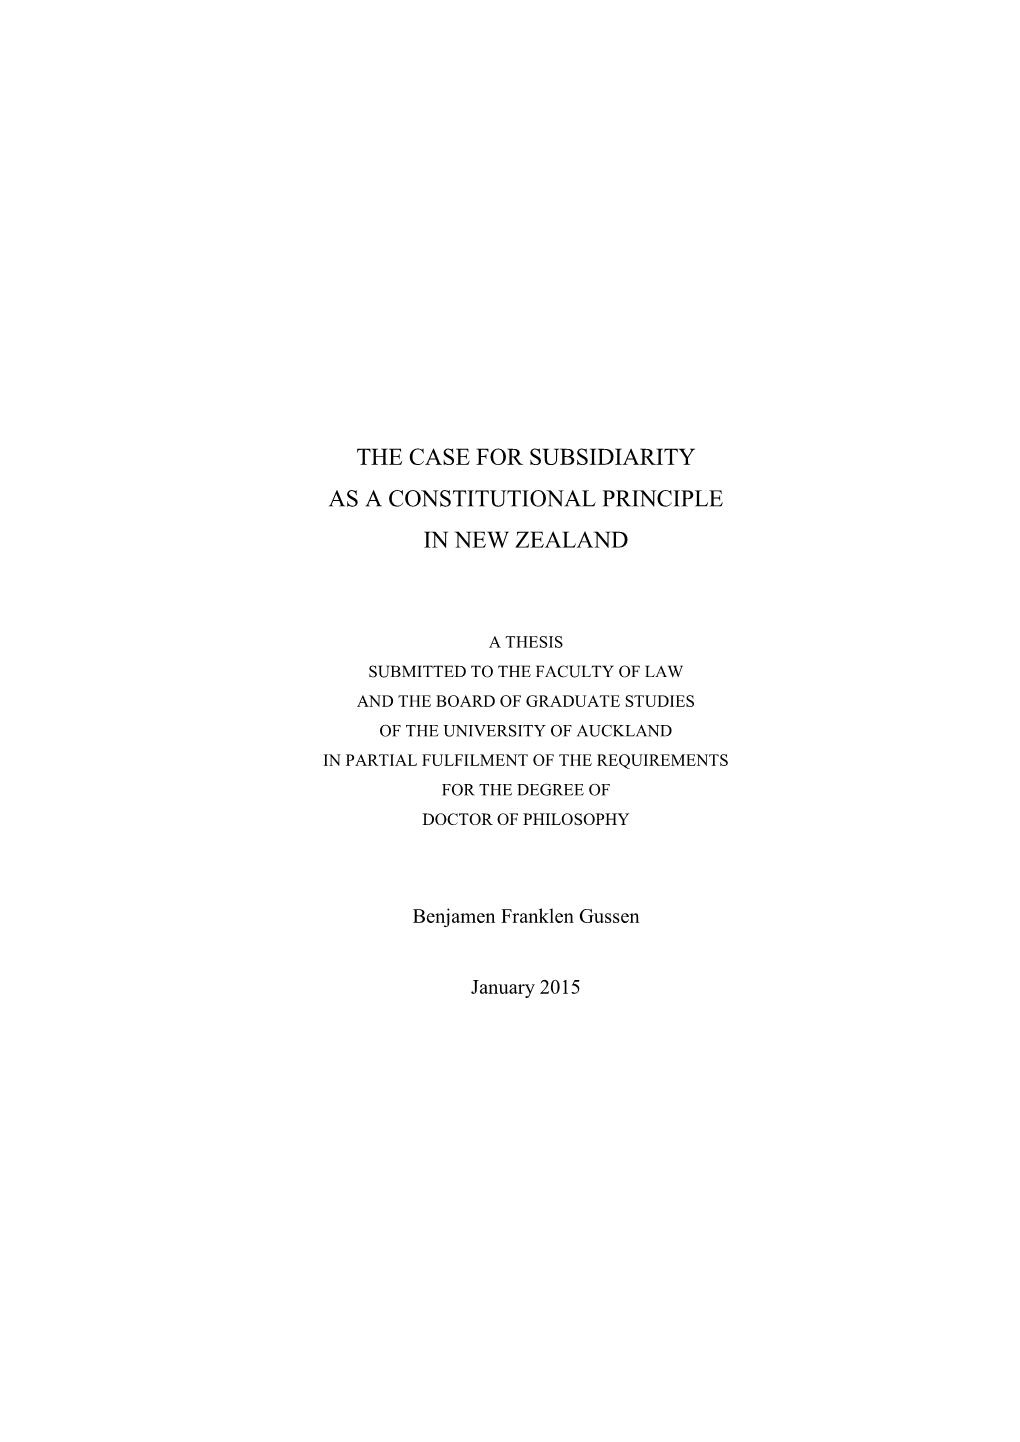 The Case for Subsidiarity As a Constitutional Principle in New Zealand